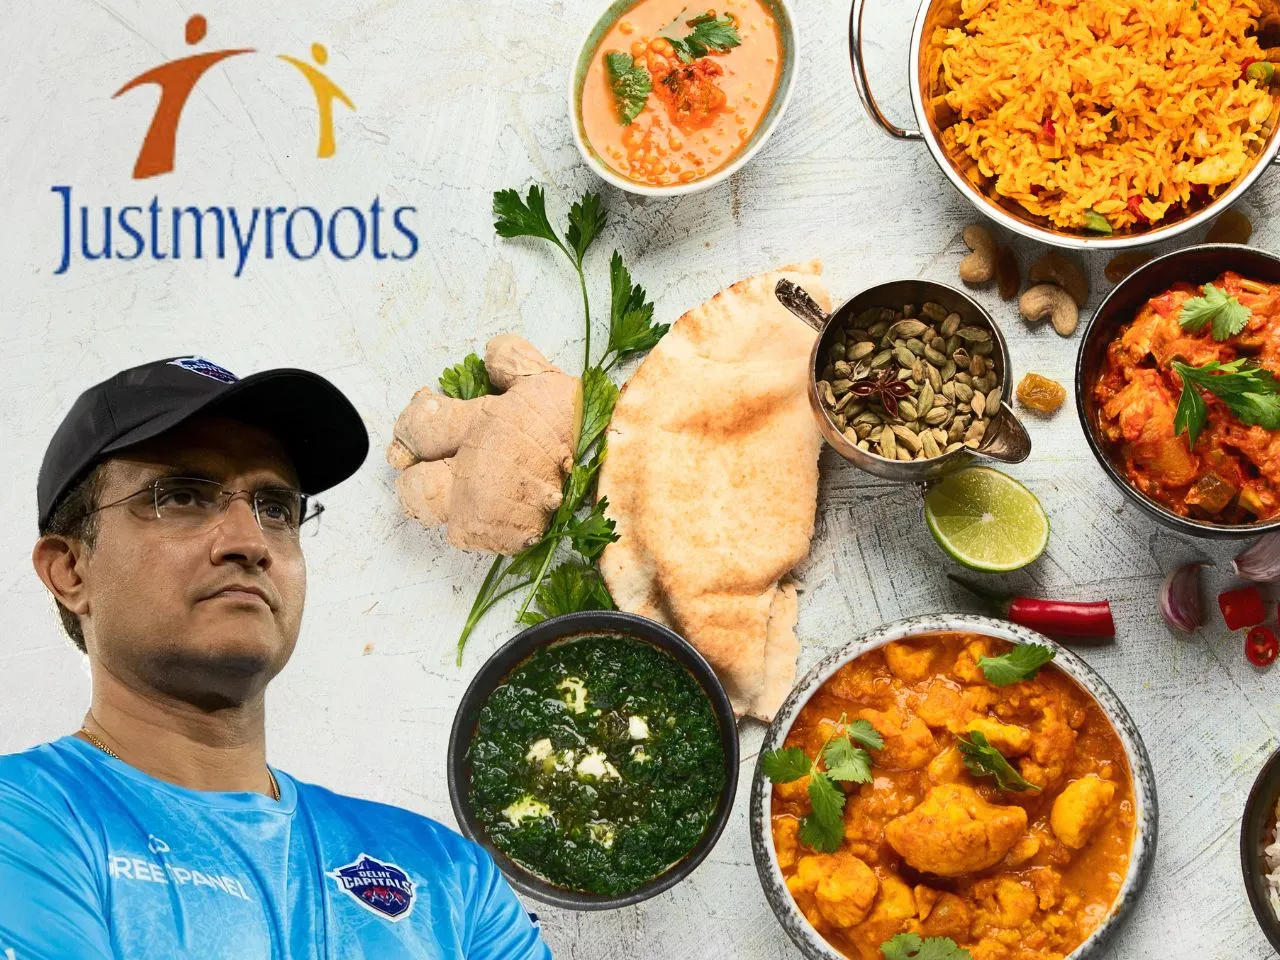 Why Is Sourav Ganguly Saying 'Just My Roots'?